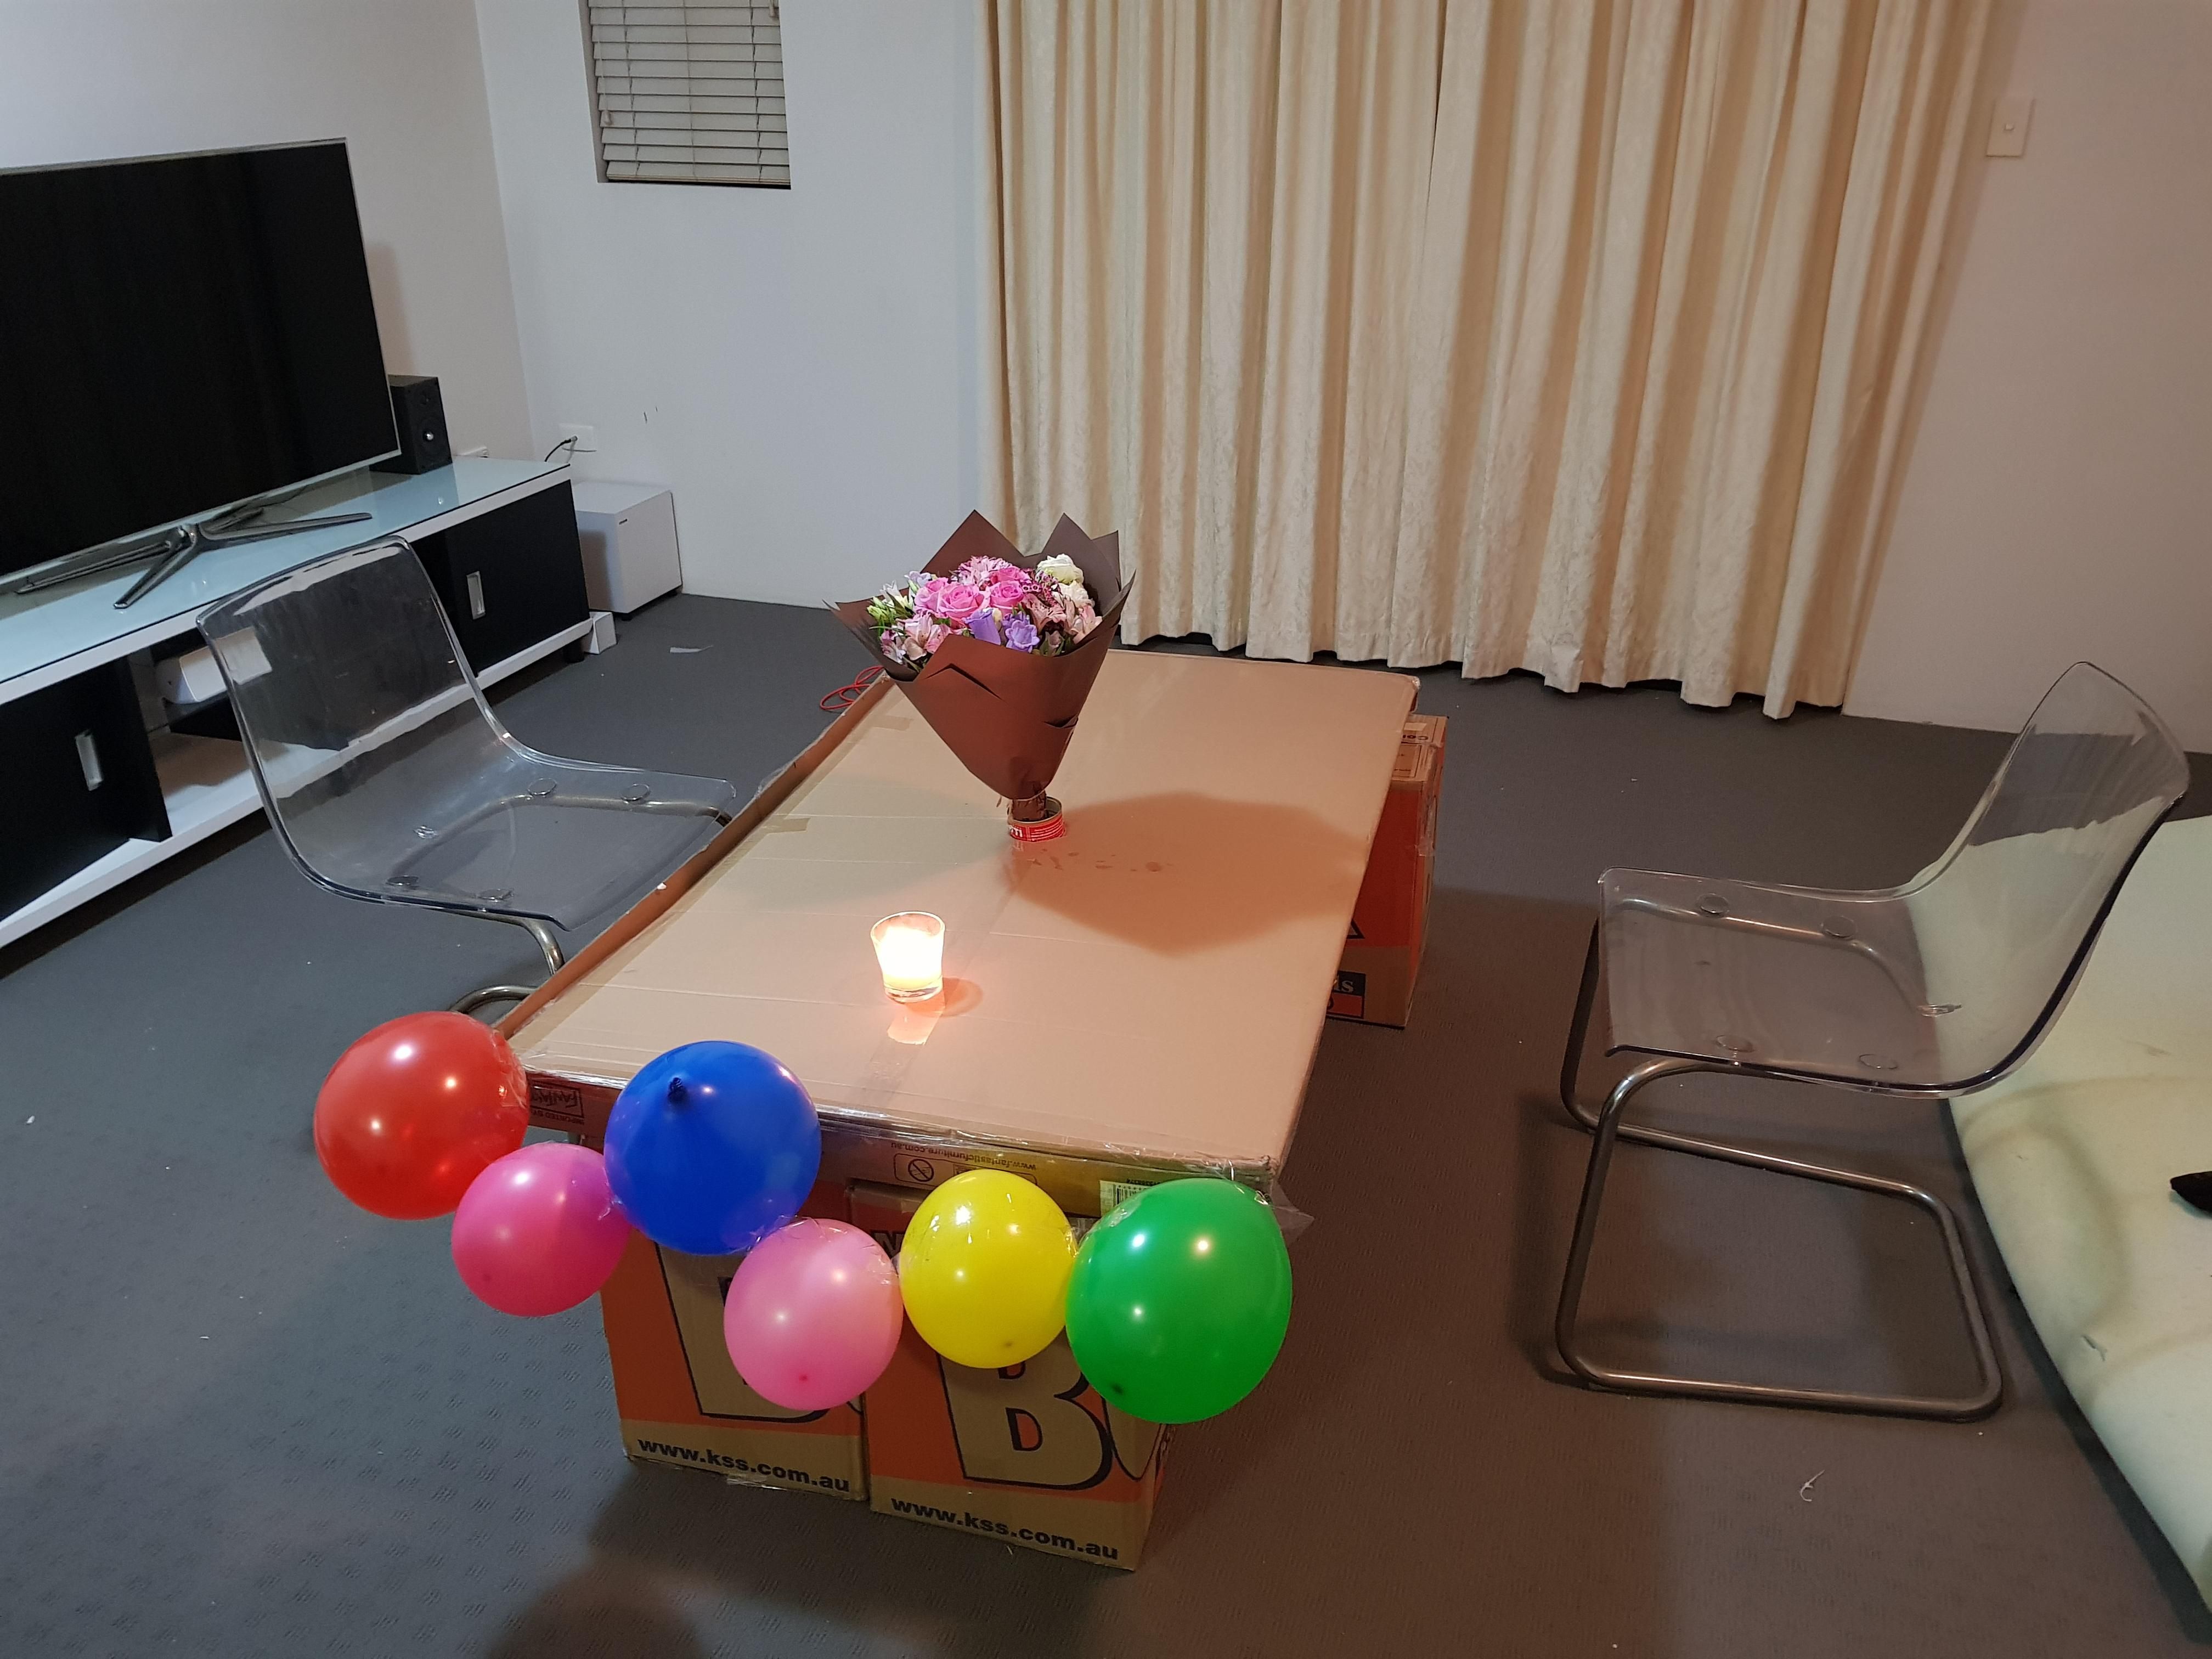 When you have just moved house and its your girlfriend's birthday.